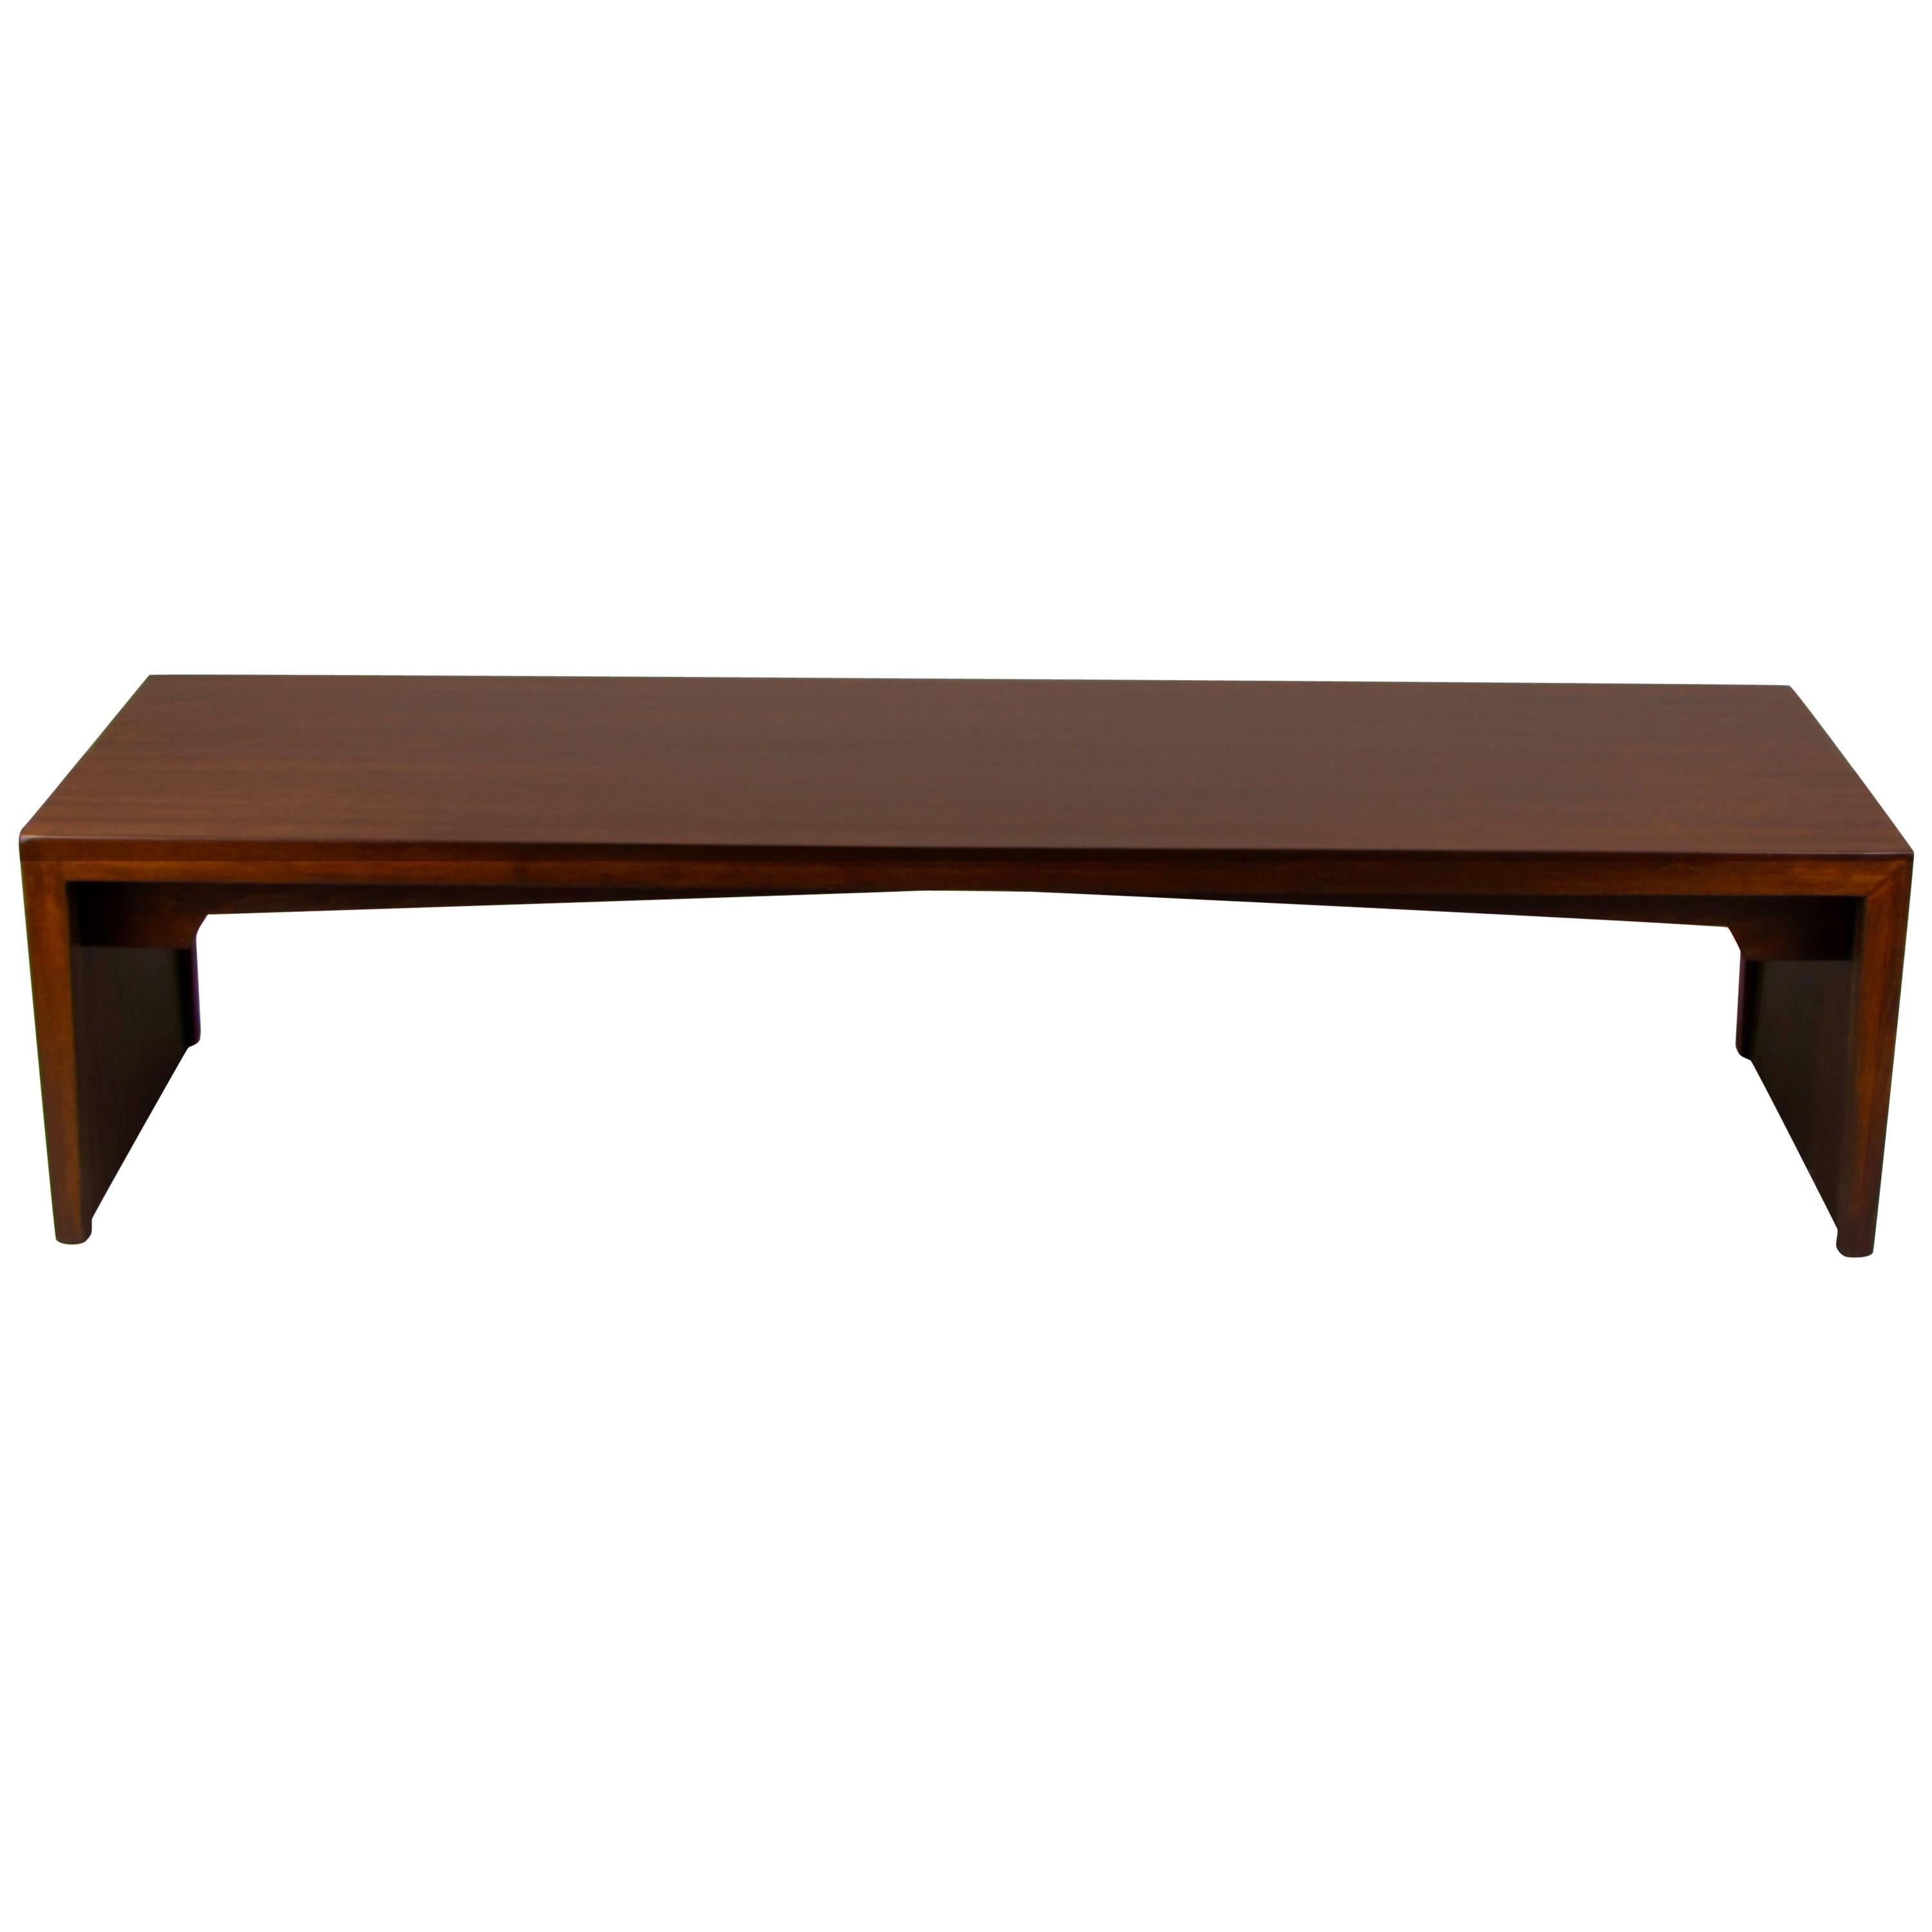 Handsome Mahogany Bench or Coffee Table by Milo Baughman for Drexel, 1950s